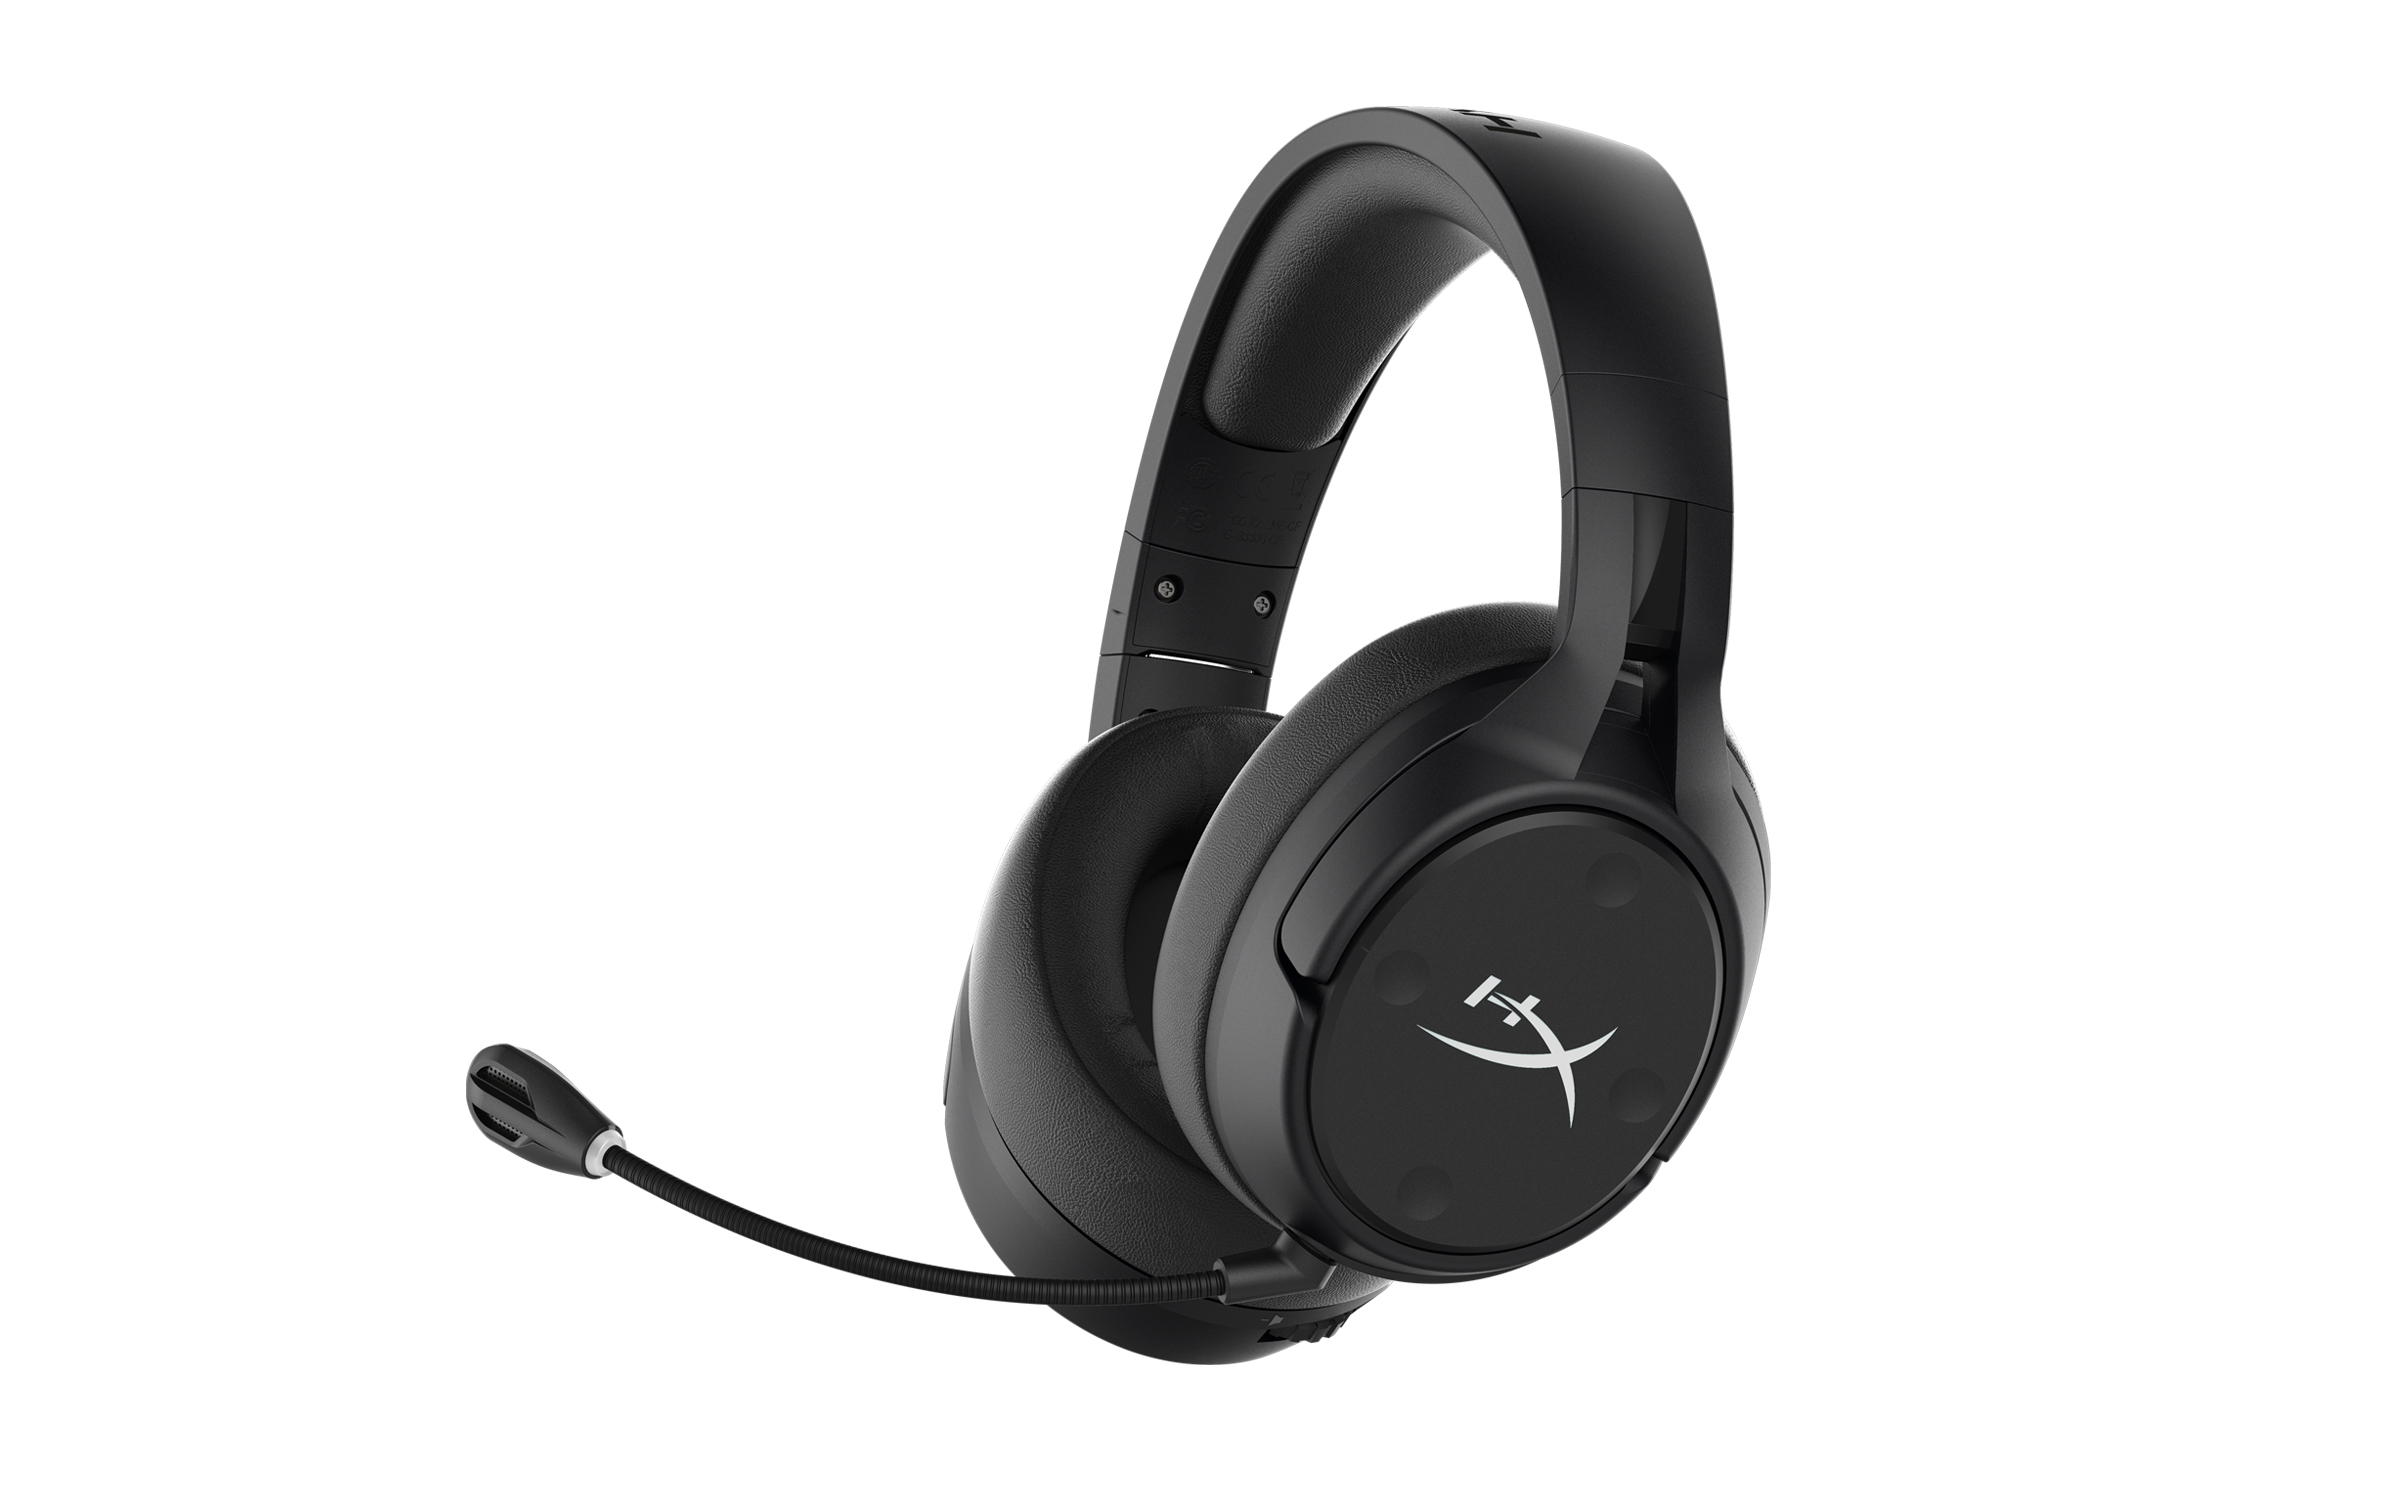 The HyperX Cloud Flight S wireless gaming headset in black against a white background.